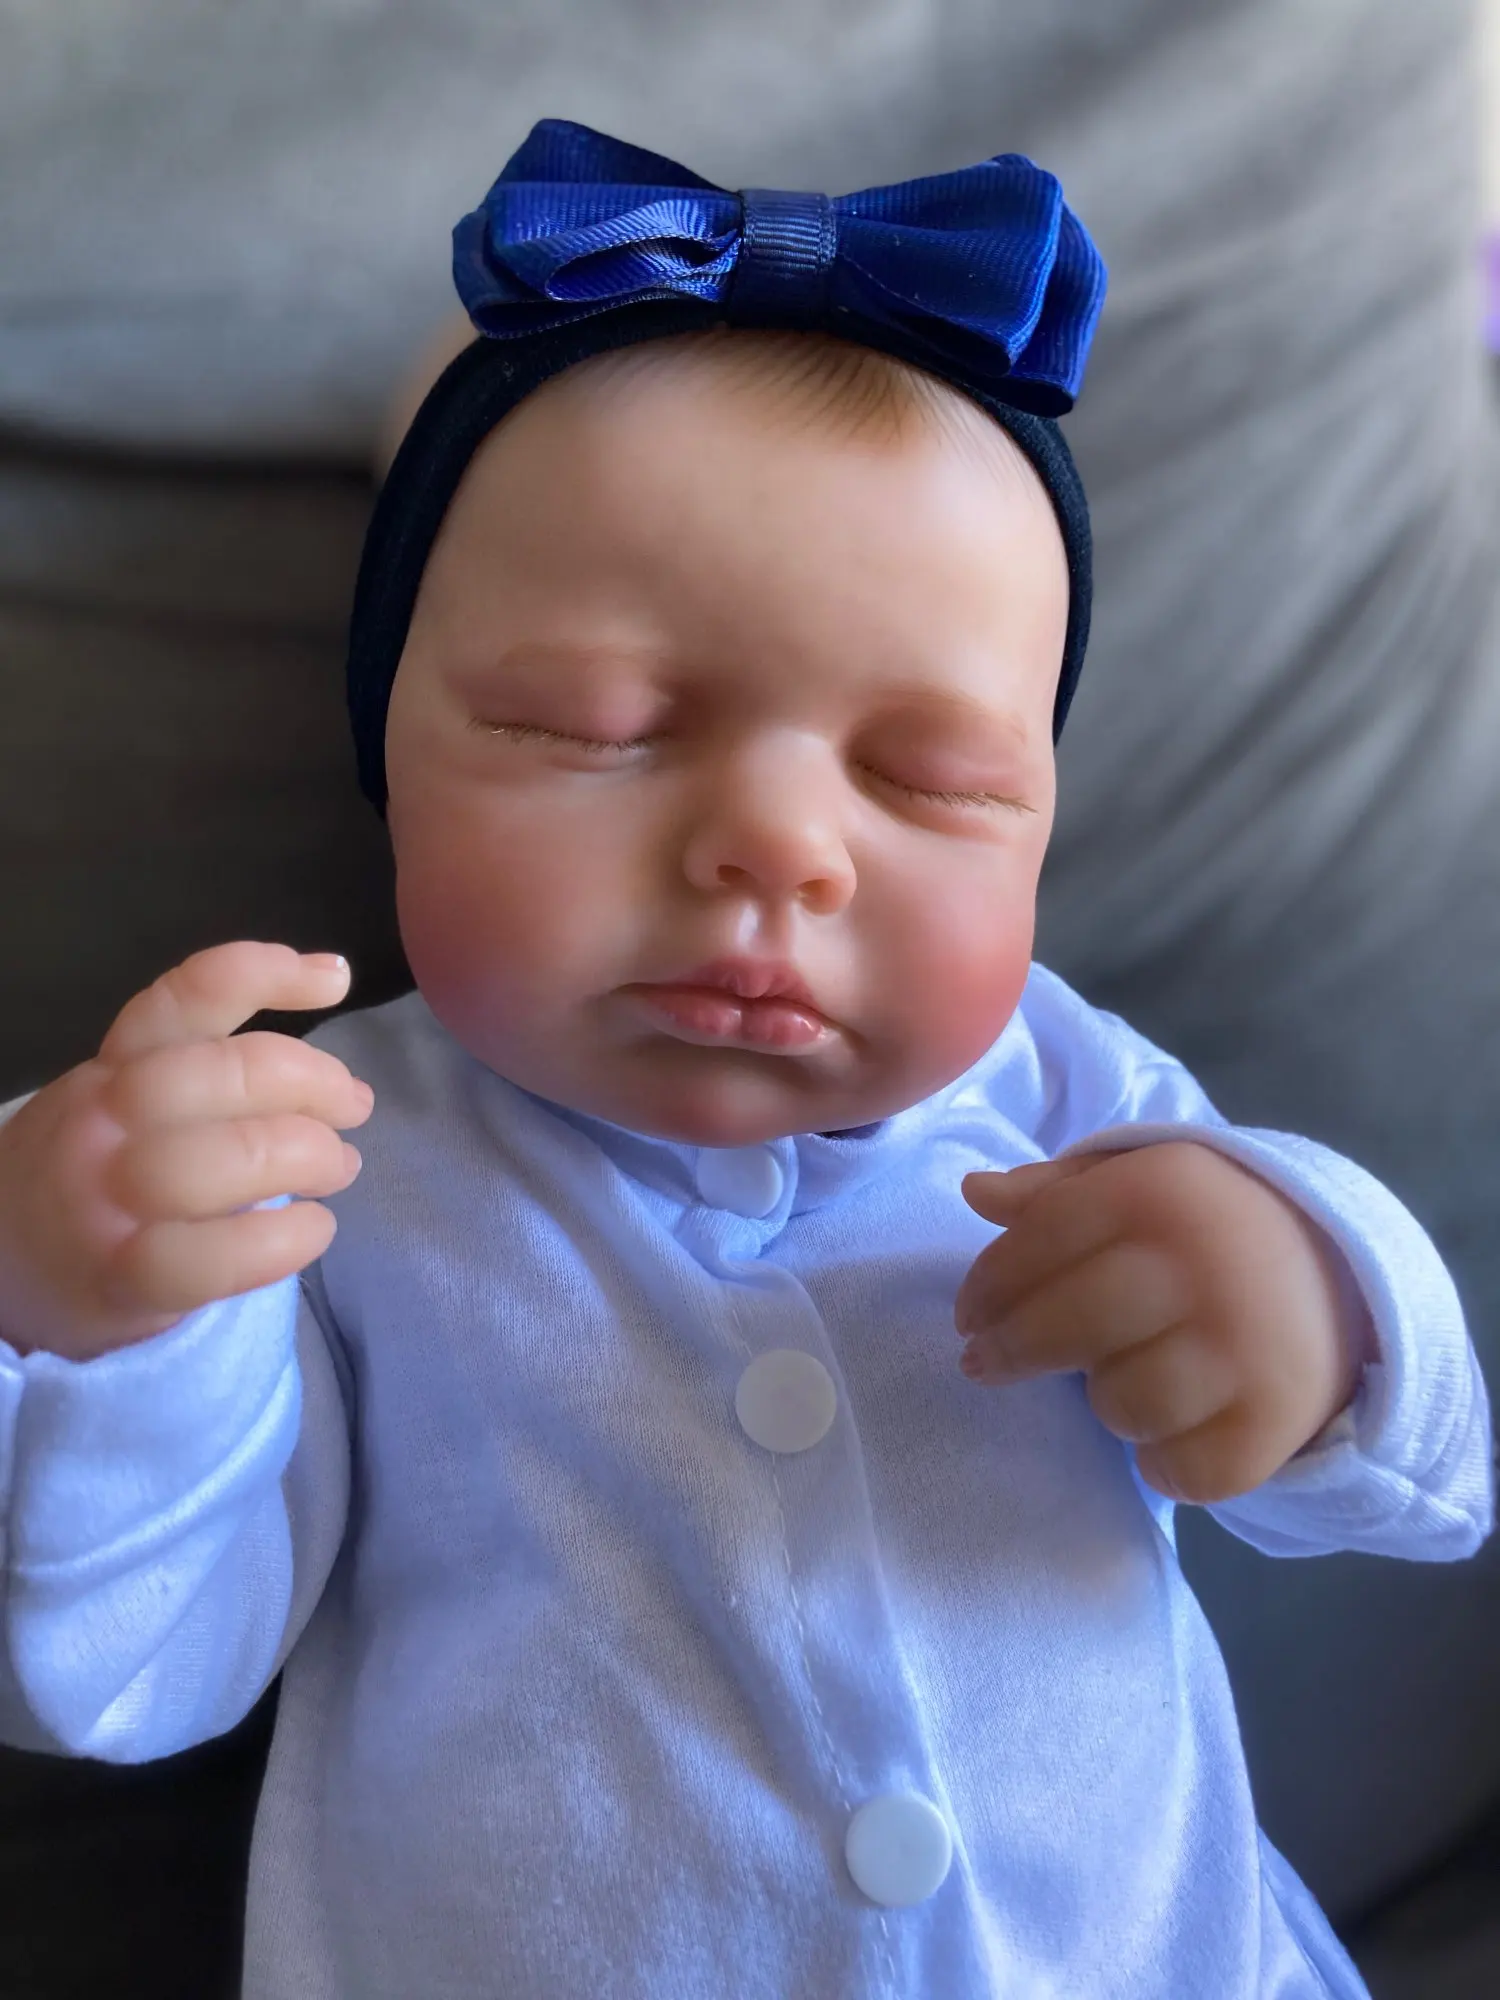 19Inch Finished Reborn Baby Dolls LouLou Already Painted Silicone Vinyl Cloth Surprise Toys Figure for Girls Christmas Gift photo review